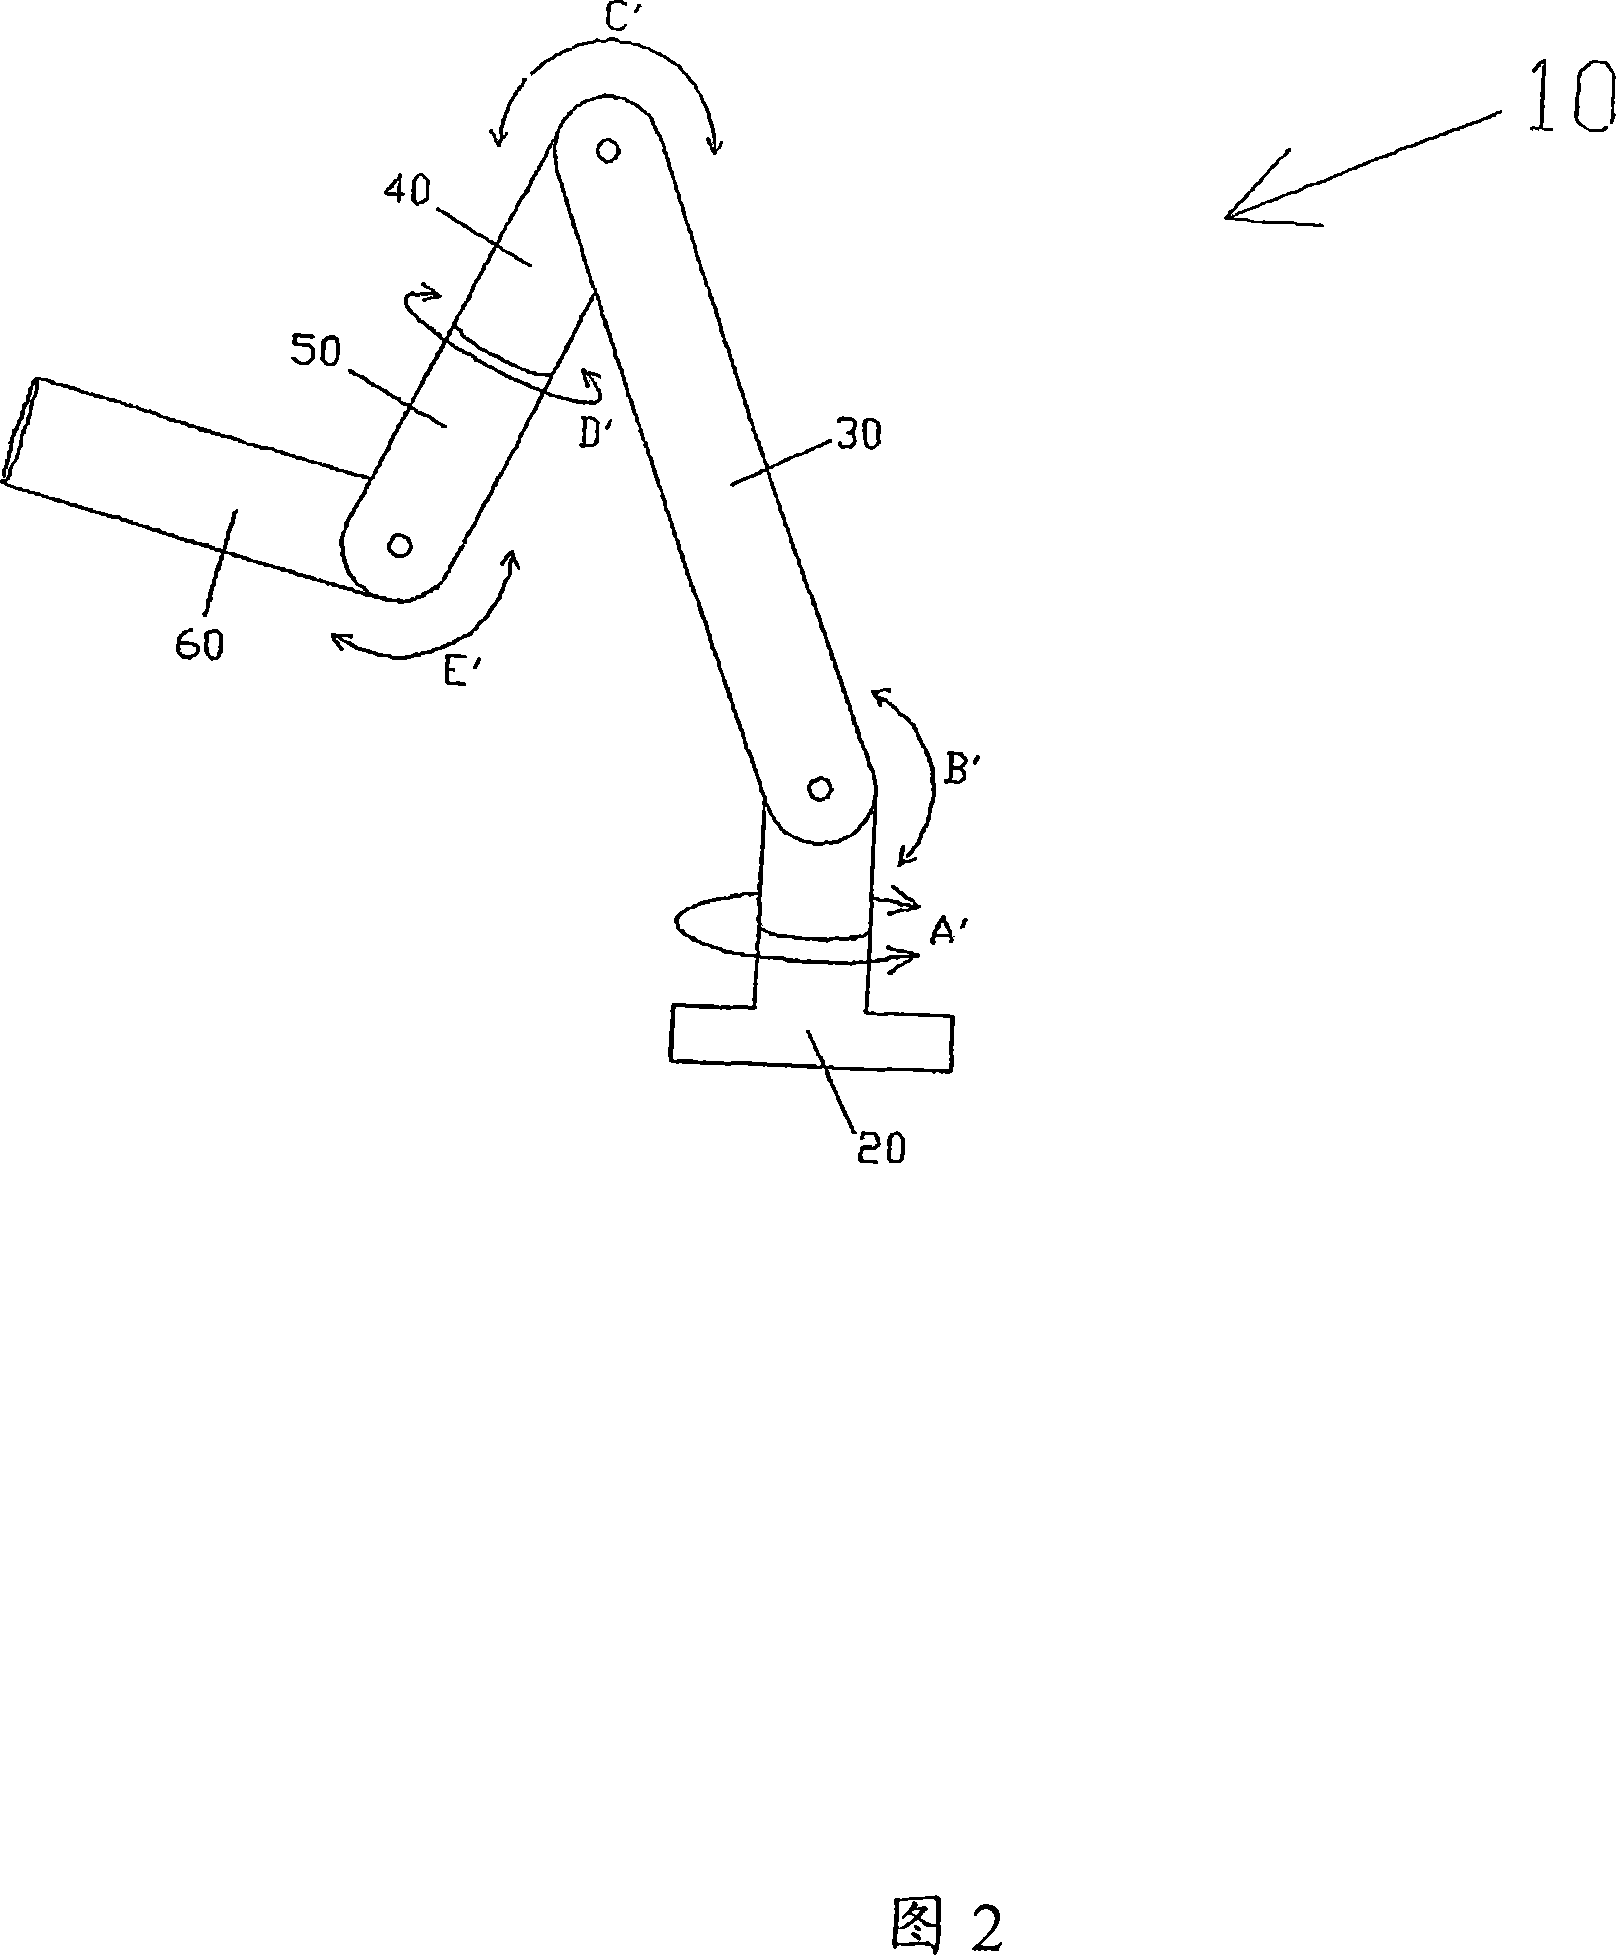 Control system for an articulated manipulator arm